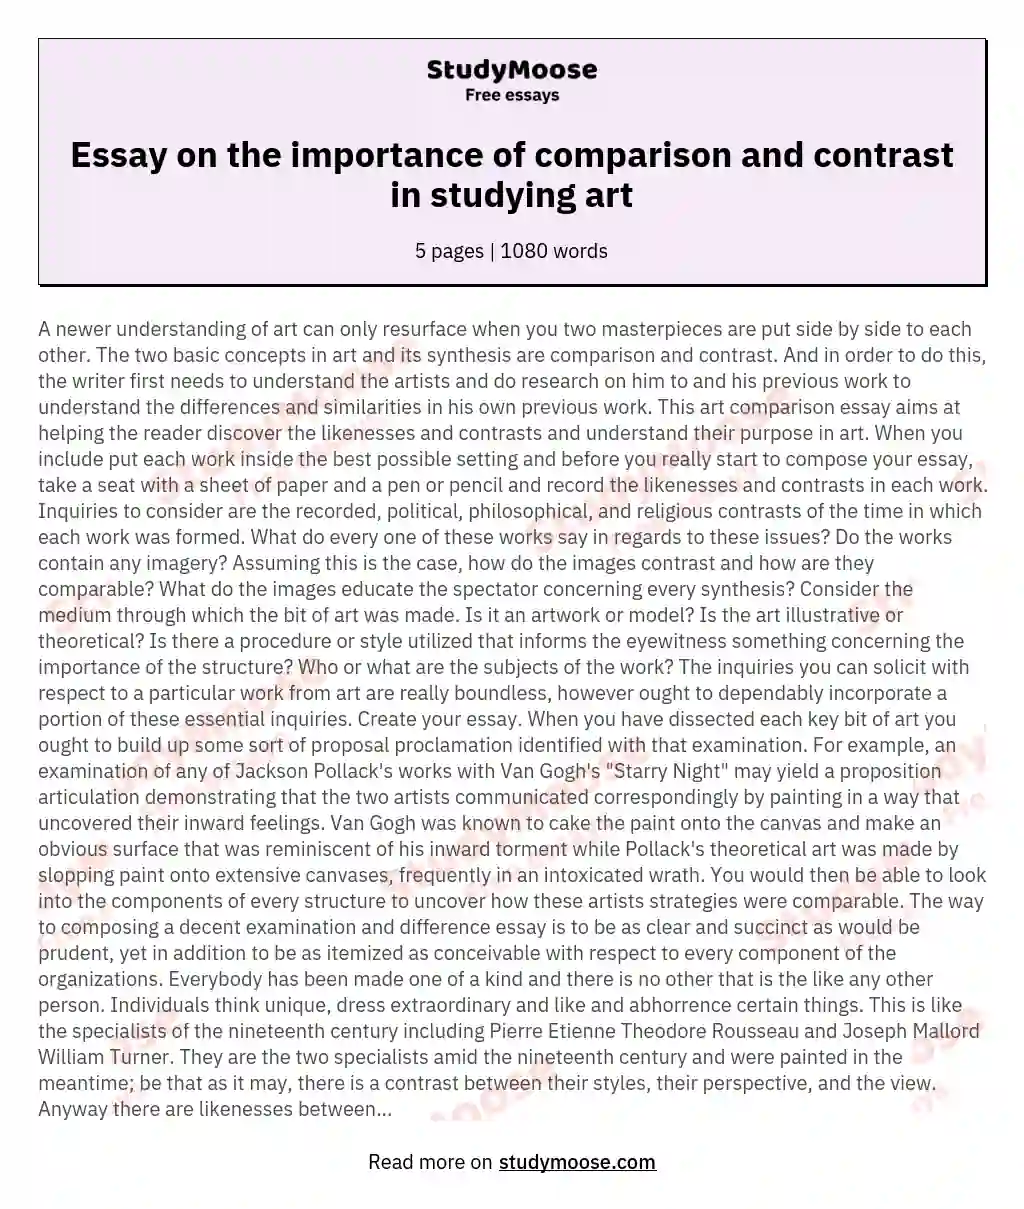 Essay on the importance of comparison and contrast in studying art essay